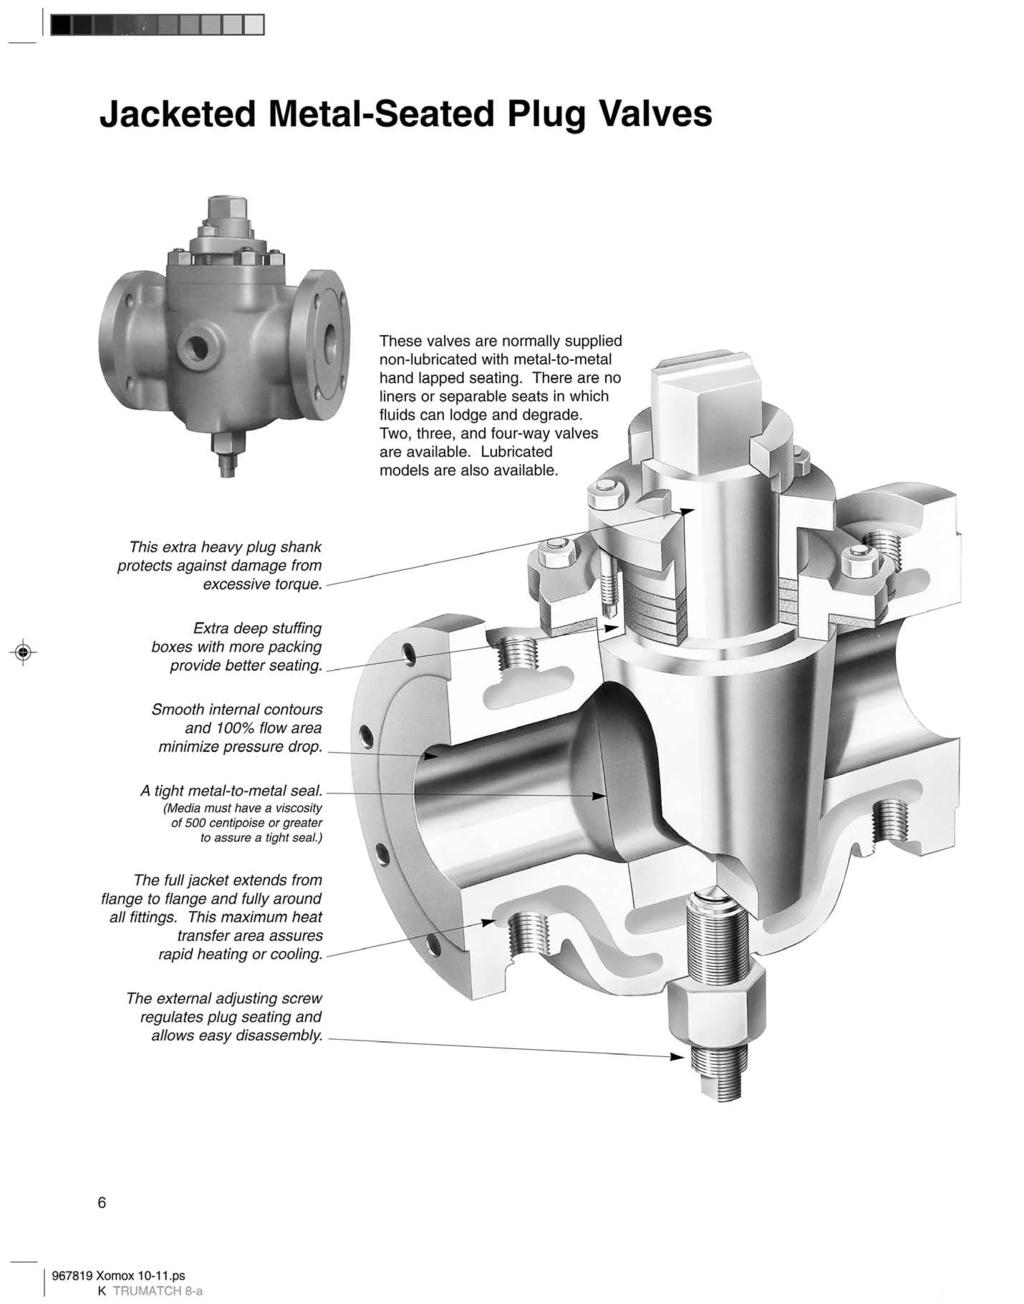 Jacketed MetalSeated Plug Valves These valves are normally supplied nonlubricated with metaltometal hand lapped seating. There are no liners or separable seats in which fluids can lodge and degrade.